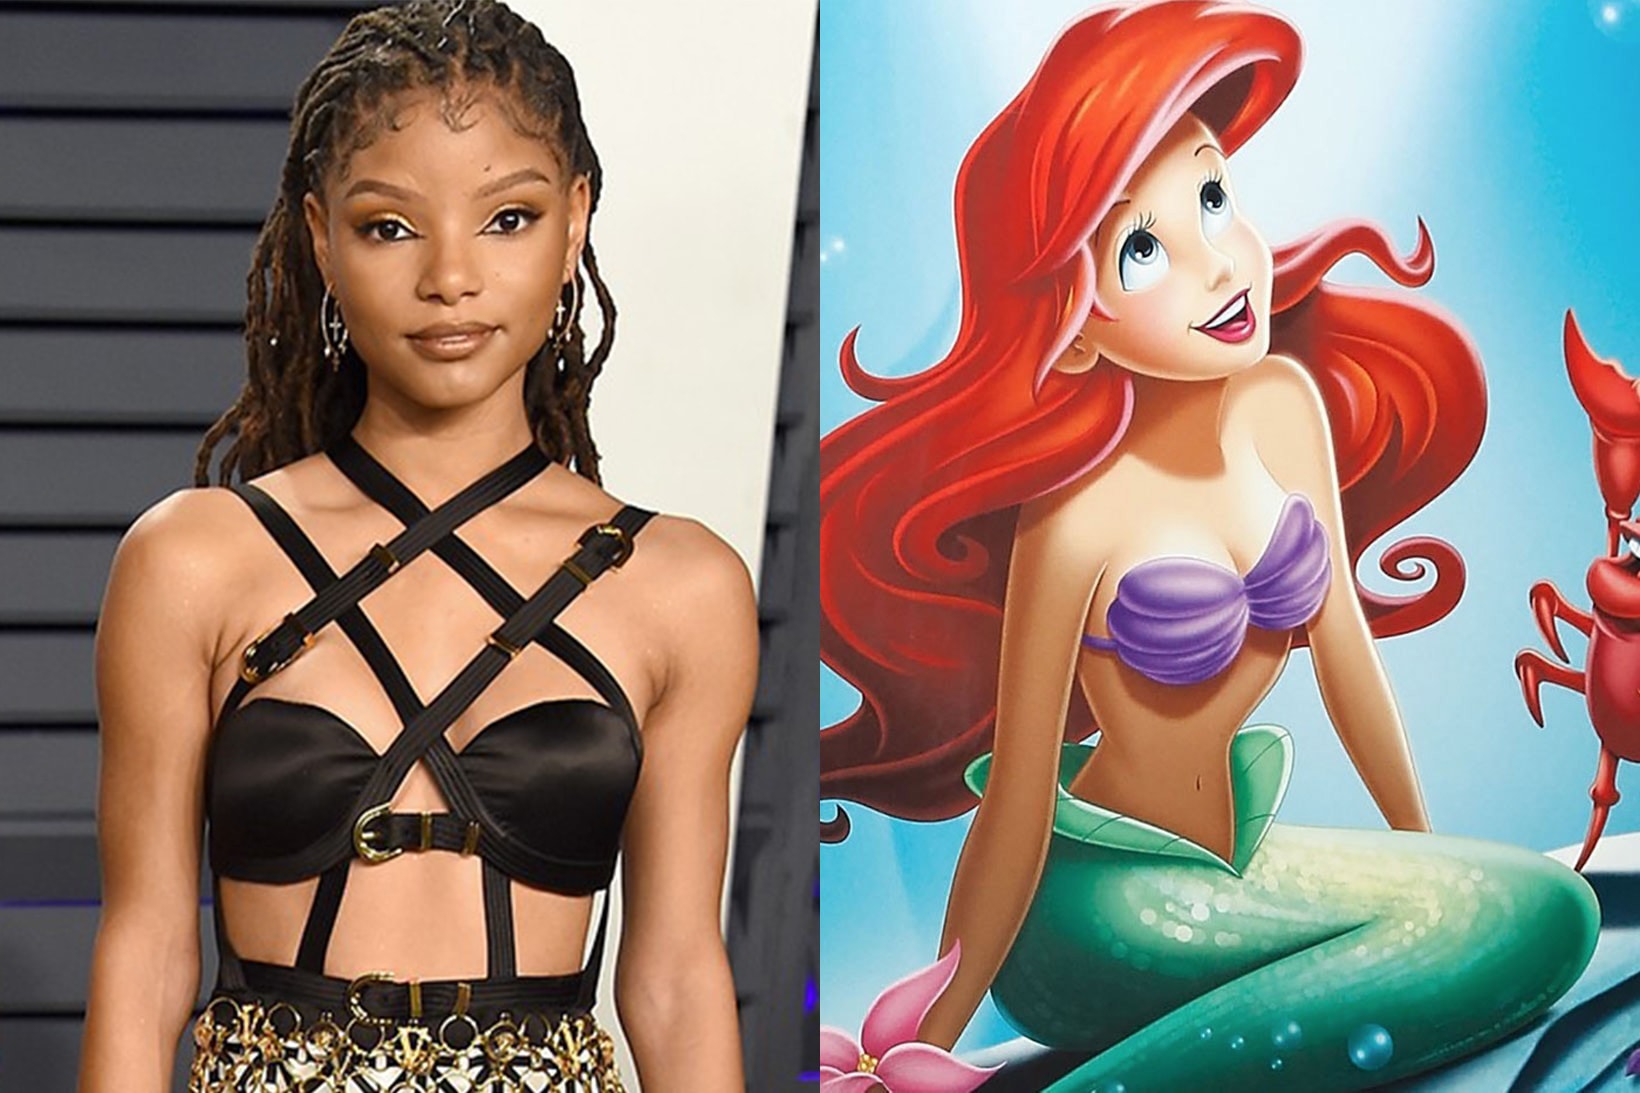 What The Live-Action Little Mermaid Movie Does Well